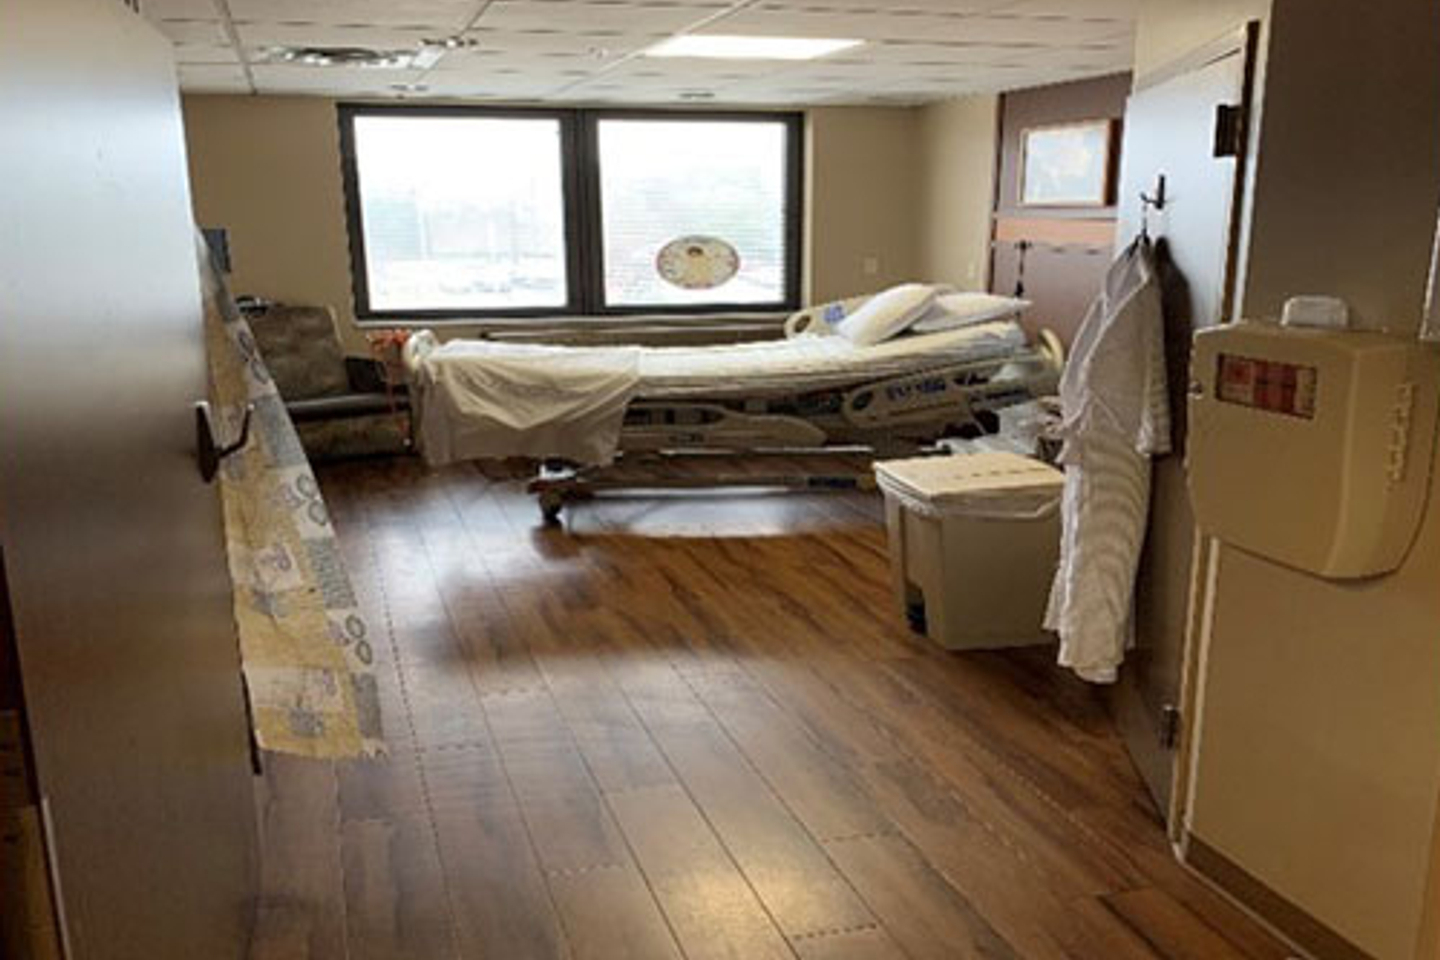 An interior view of a birthing room at TriStar Centennial Women's Hospital